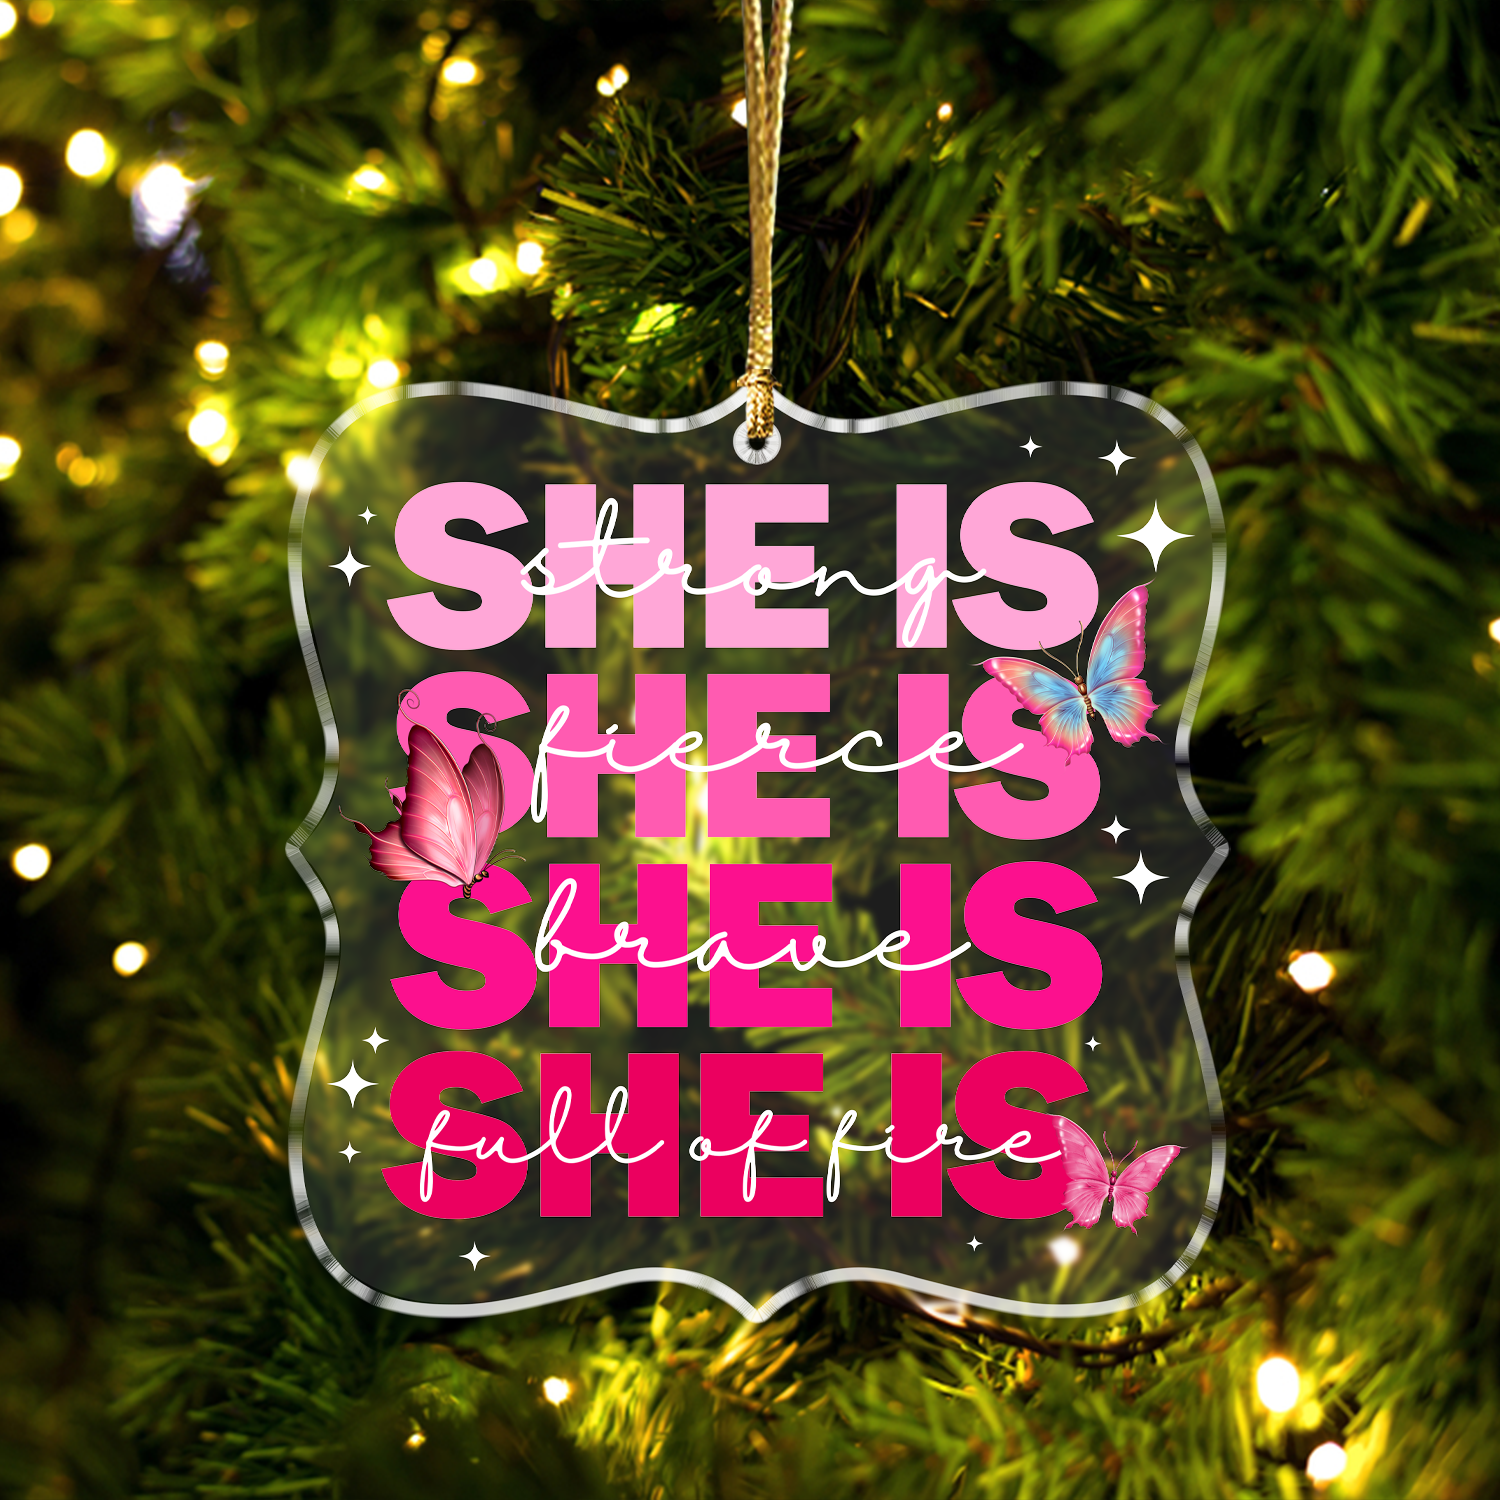 She Is Strong Pink Butterflies Christian Ornament Gift Christmas Acrylic Transparent Ornament Car Hanging